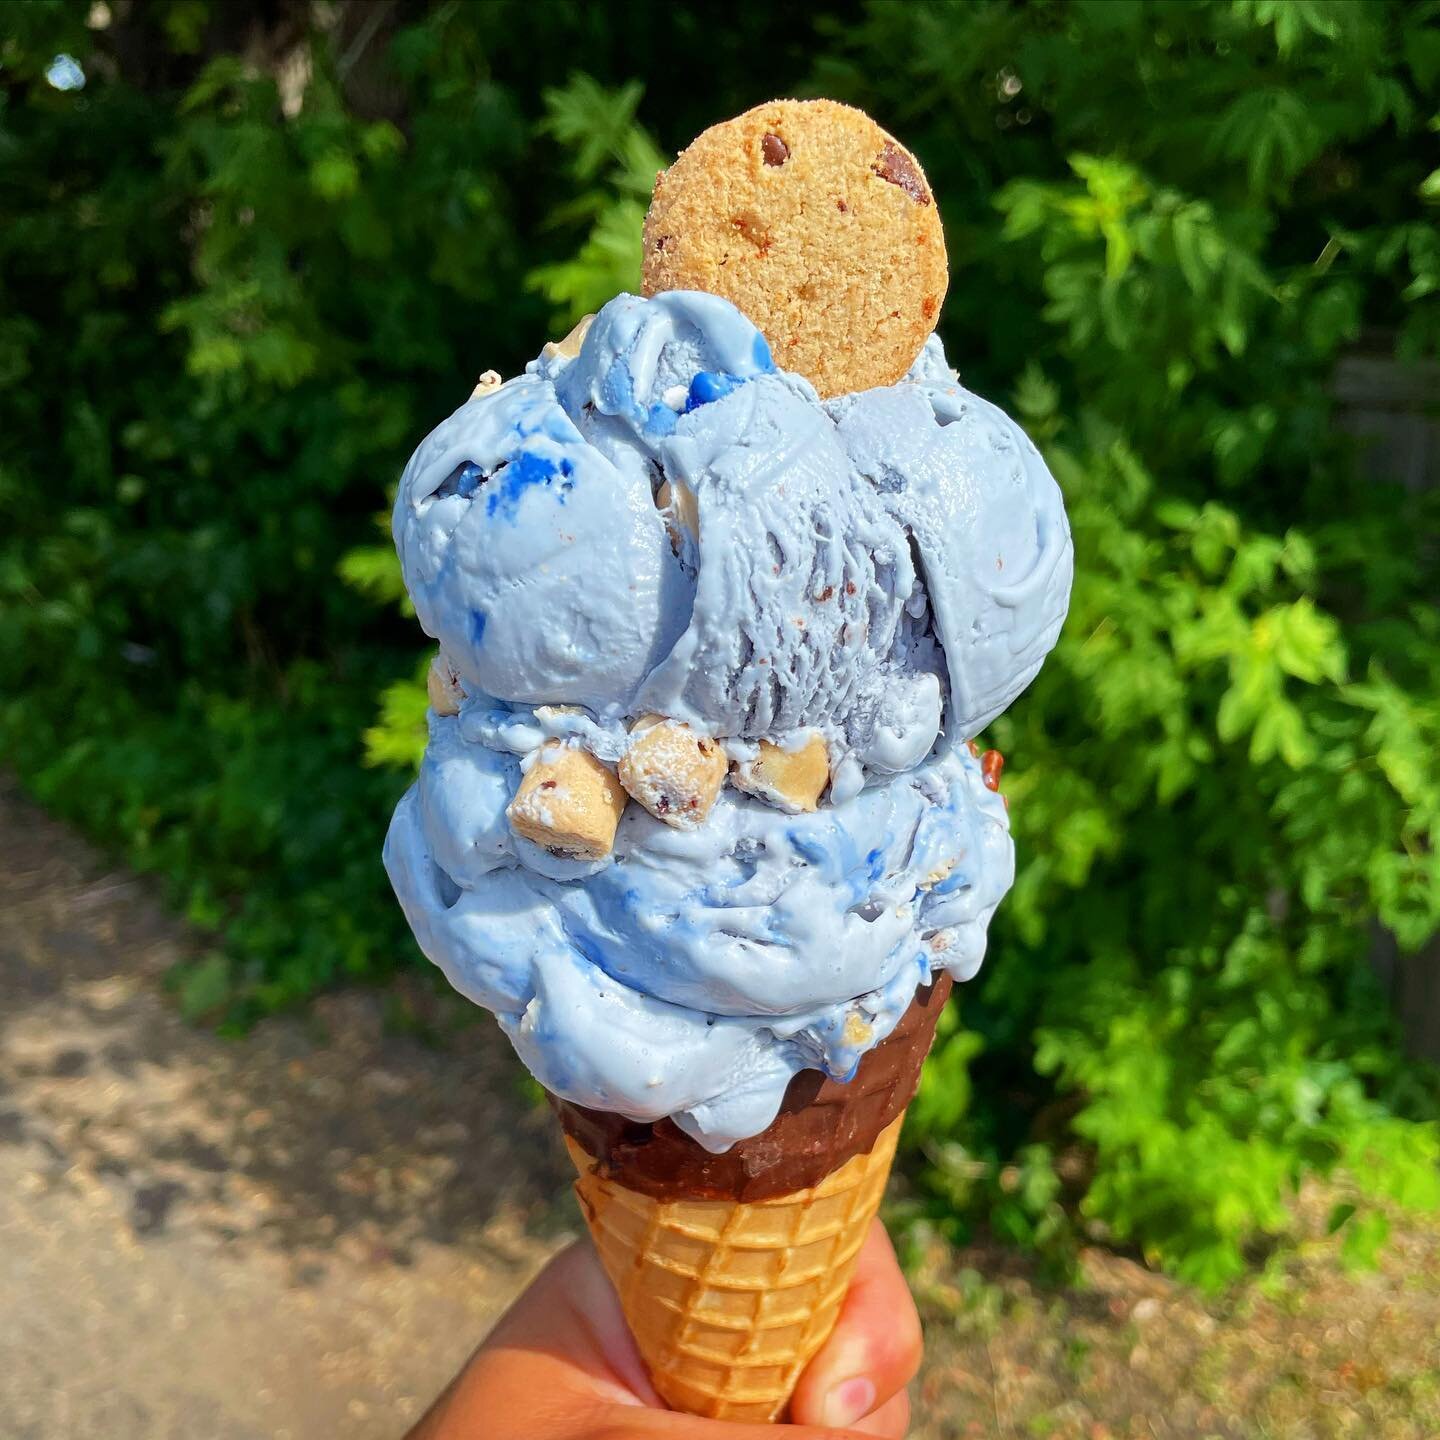 Happy Father&rsquo;s Day weekend! Grab your dad, then grab a cone at @nelliesicecream. It&rsquo;s the little things that make lasting memories. #shoutouttothedads #dadsday #nelliesicecream